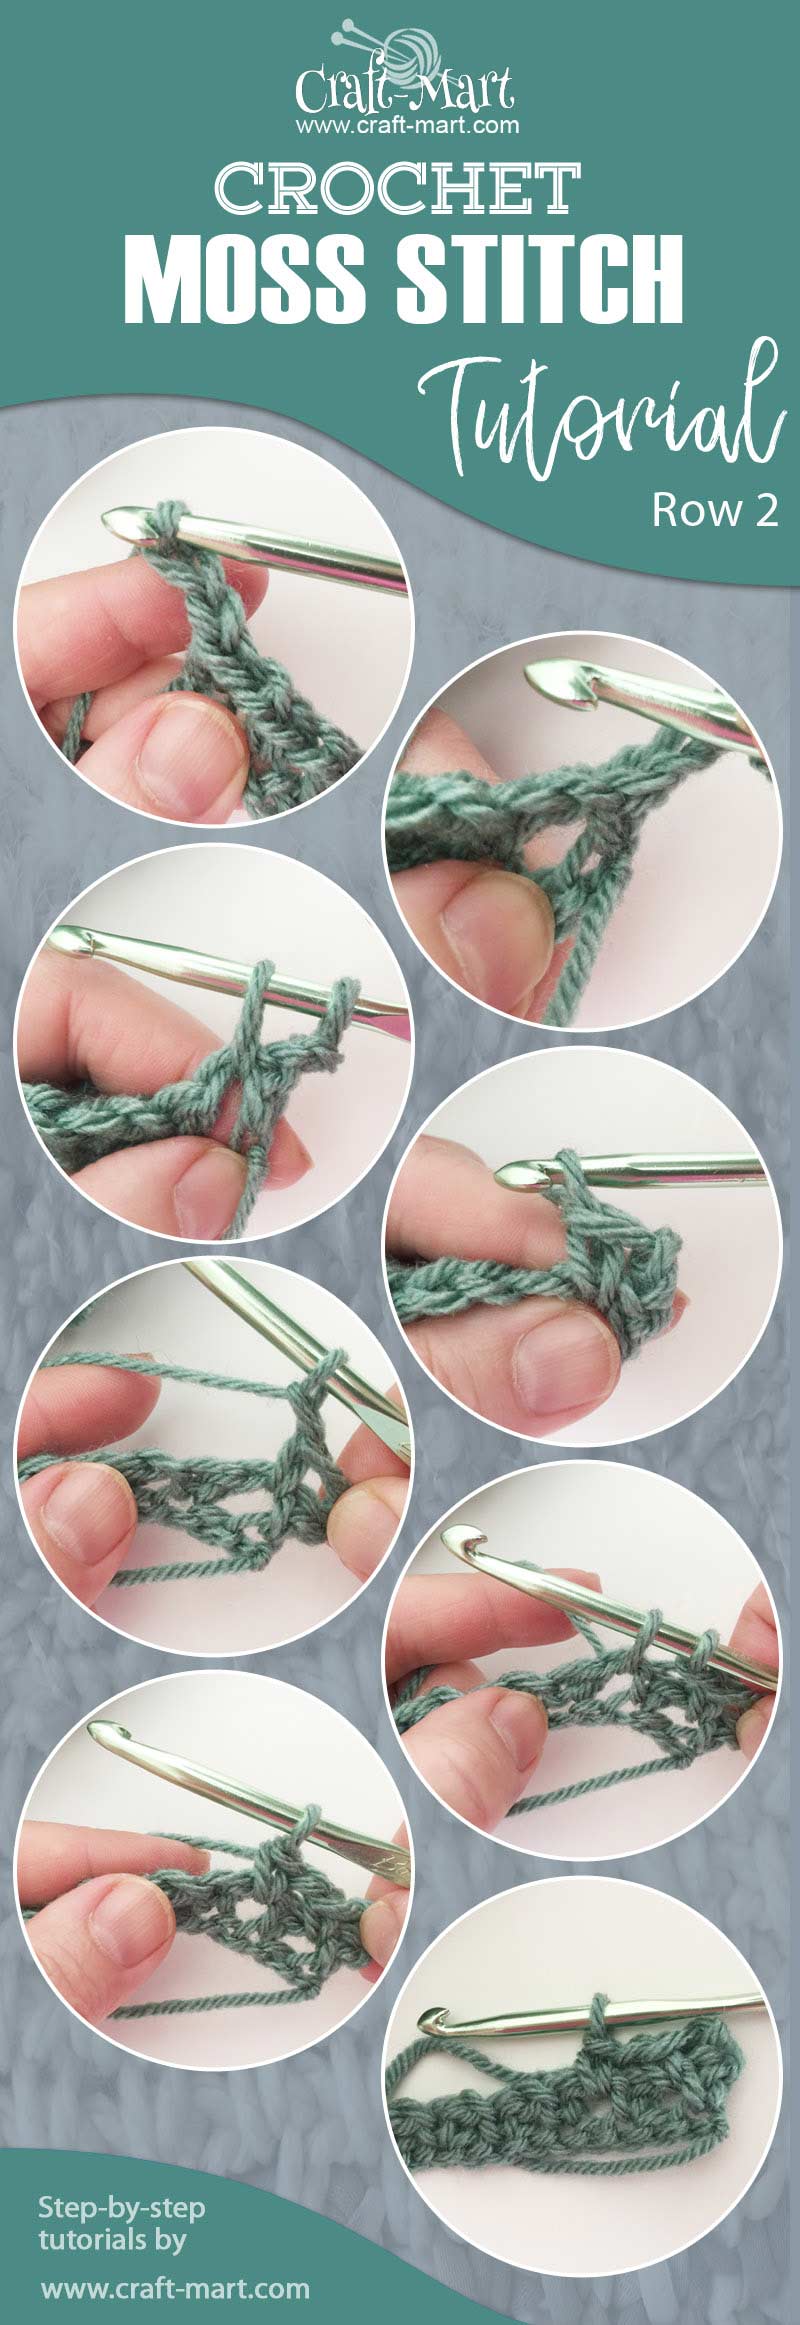 how to crochet a blanket - moss stitch tutorial row 2